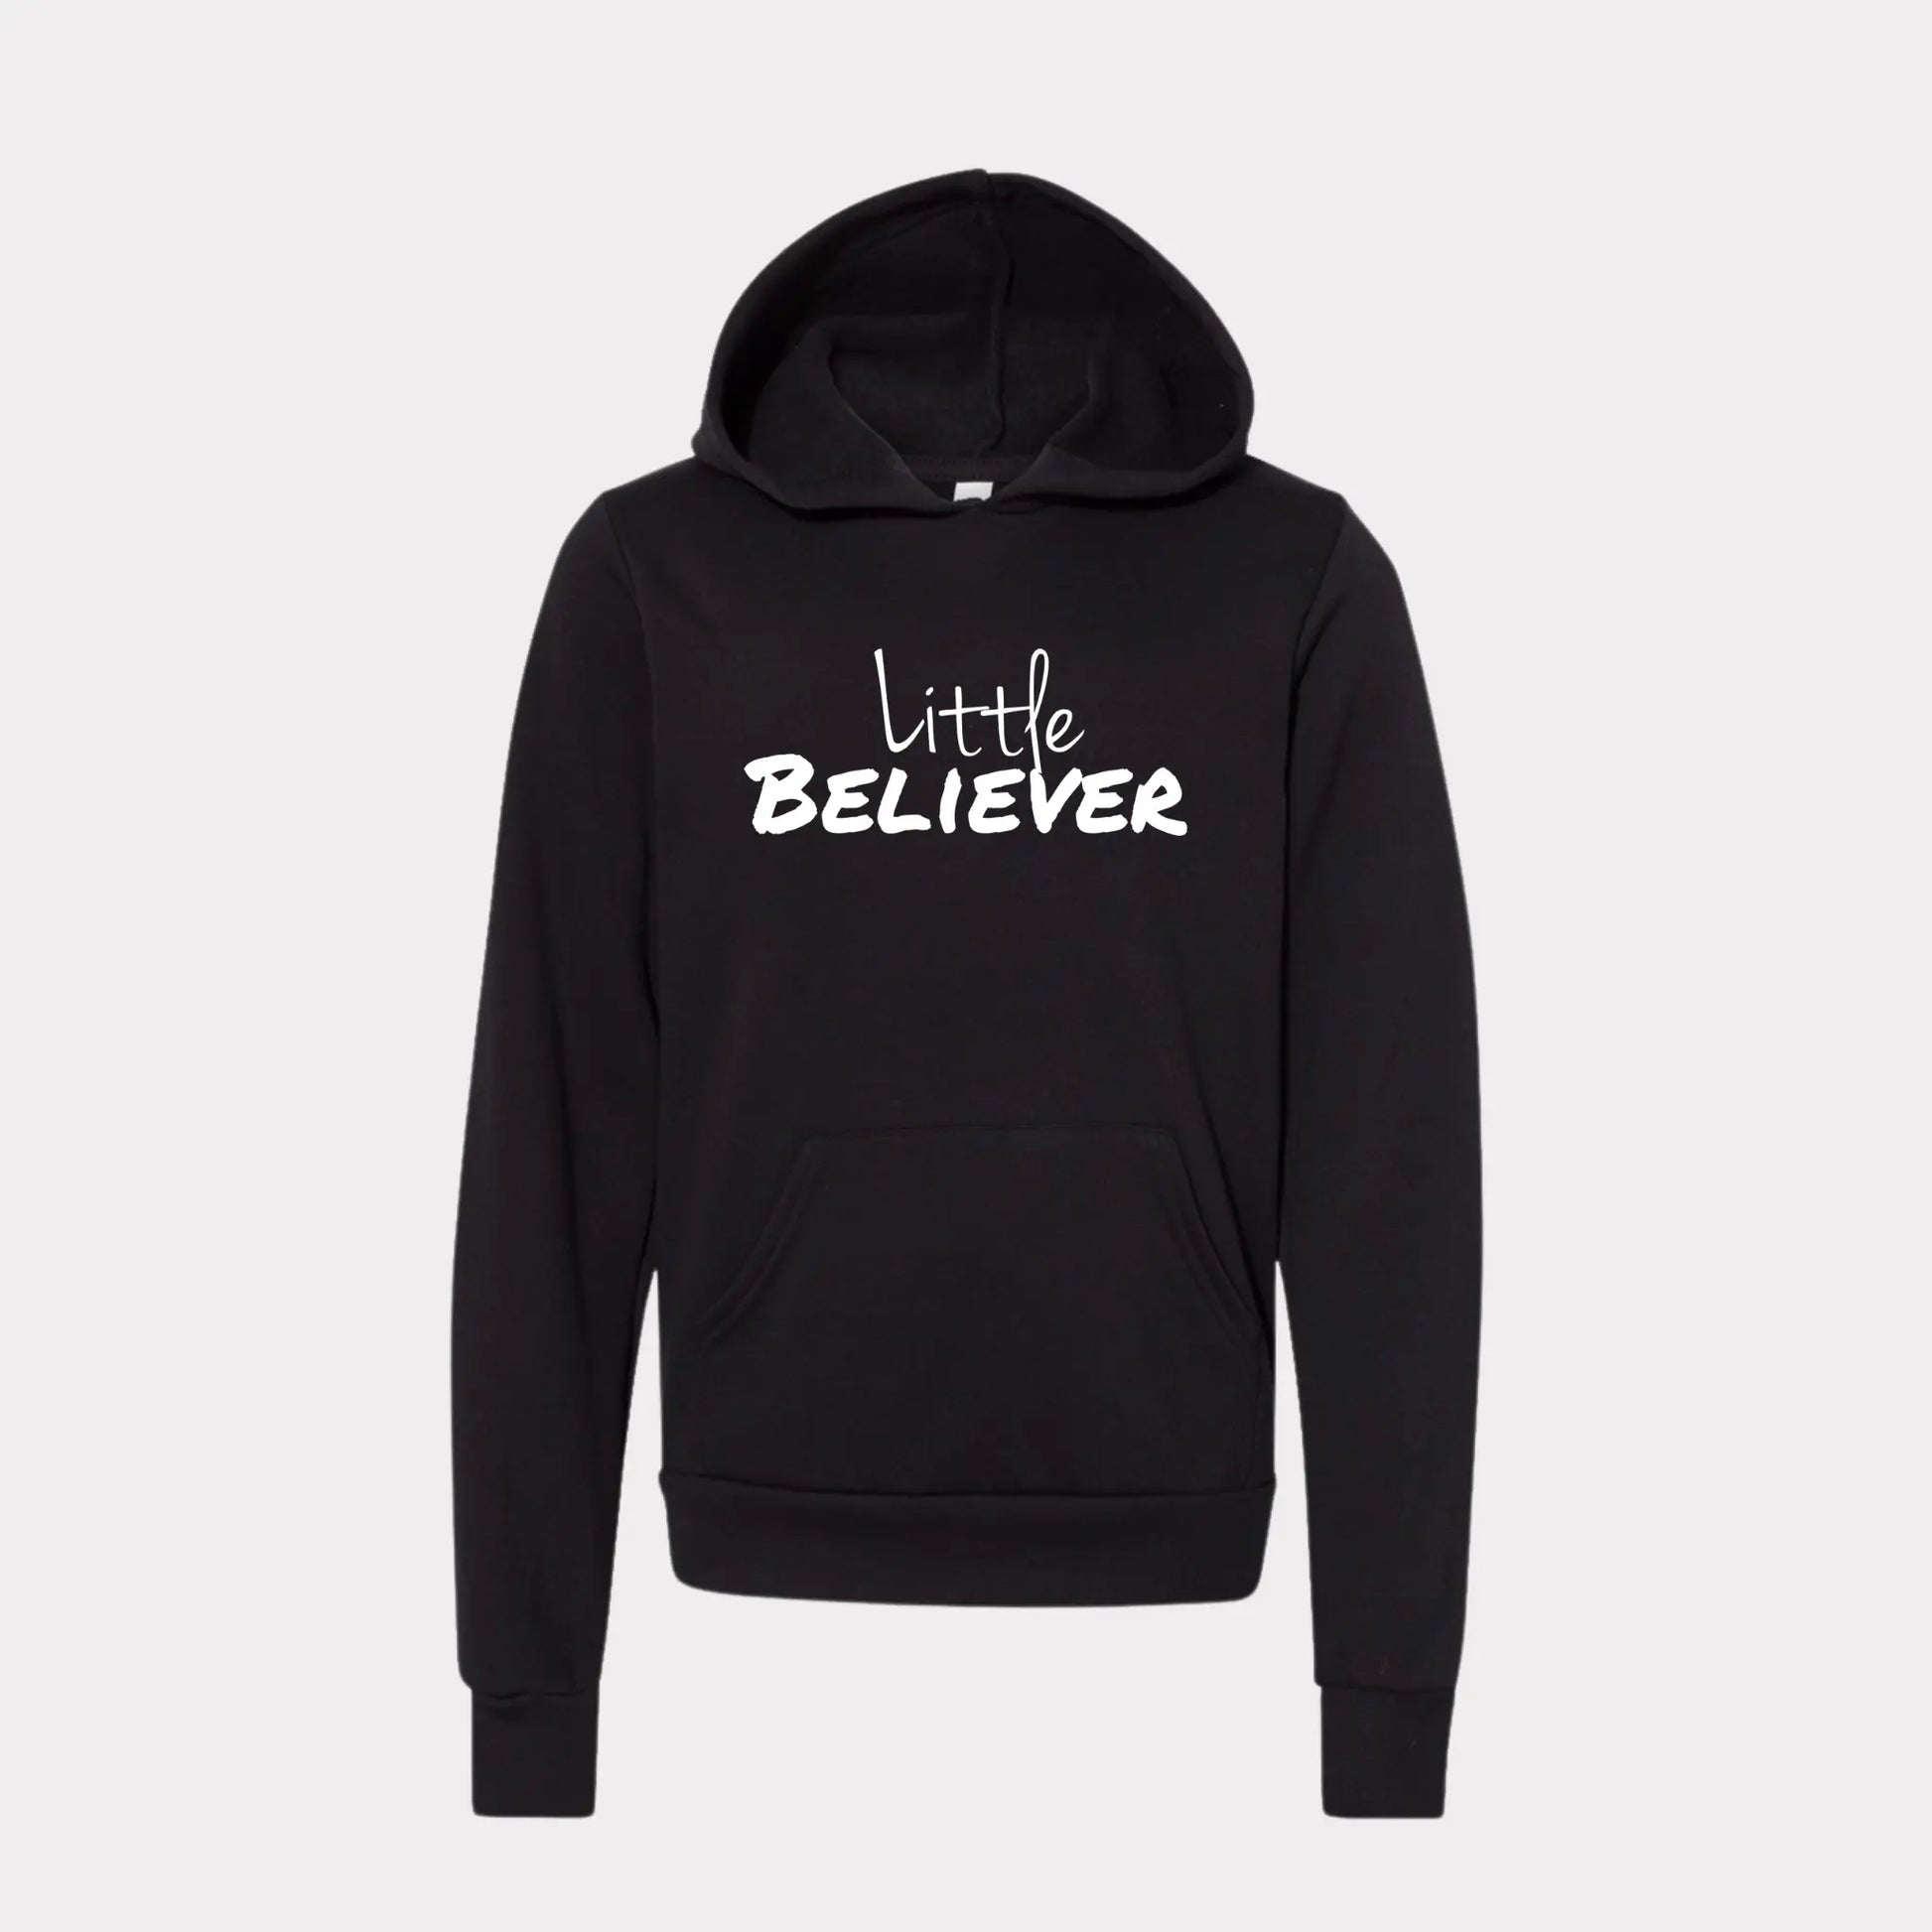 Little Believer Hoodie by Crown of Favor. Black little believer john 3:16 hoodie by Crown of Favor. Crown of Favor Authentic Christian Streetwear. Believer collection John 3:16 Little Believer.